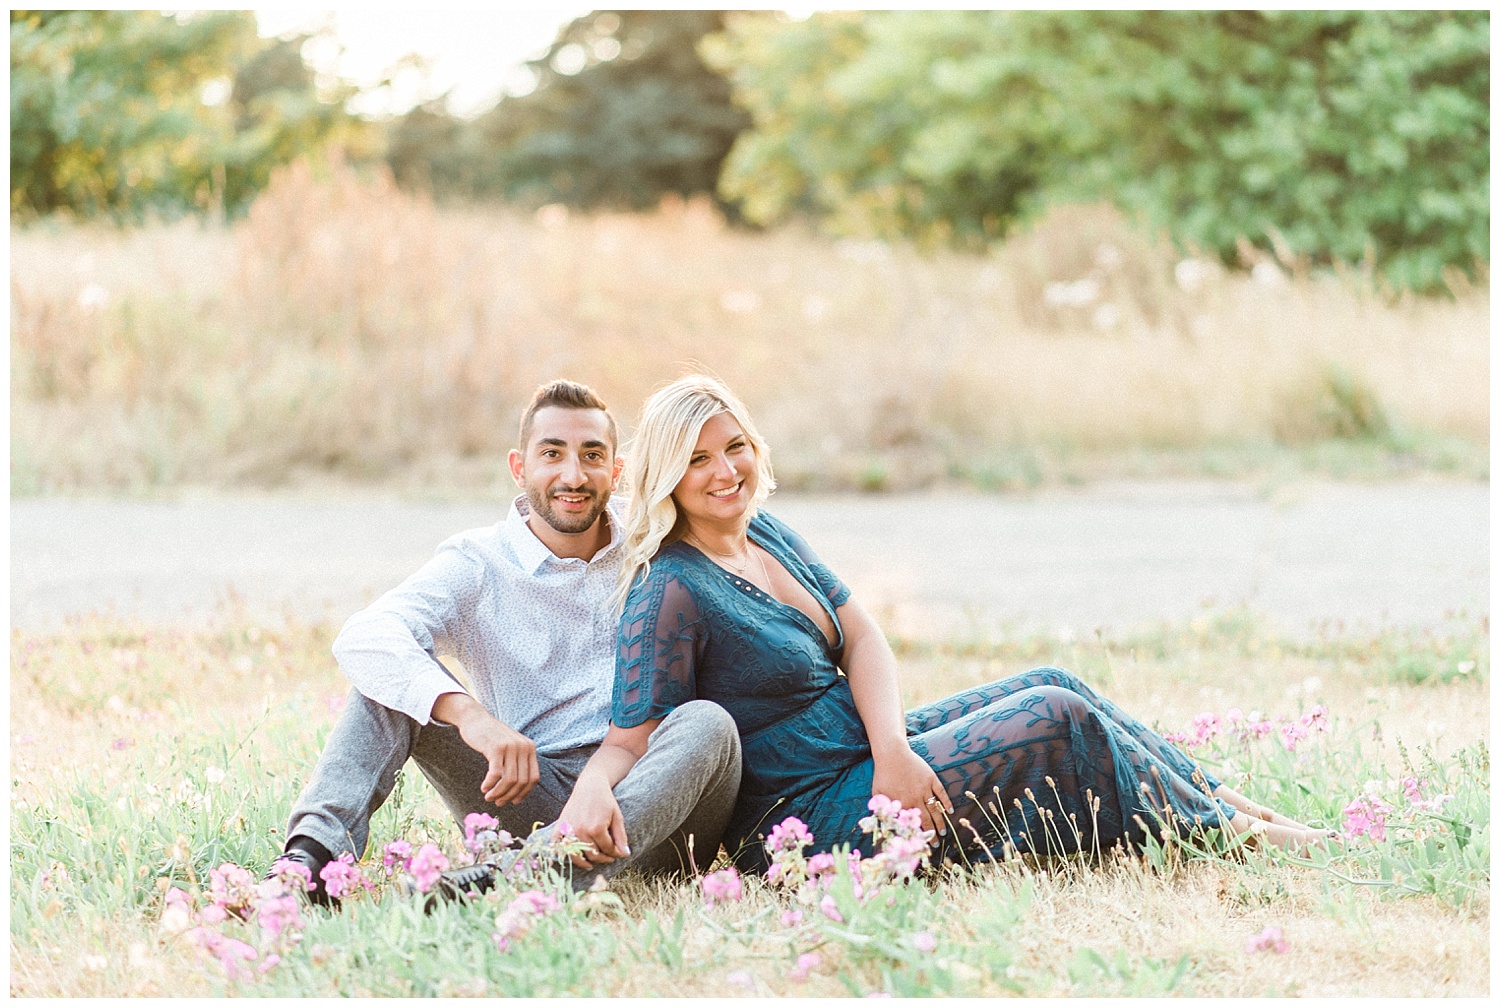 Lucci Greg S Pink Sunset Engagement At Discovery Park Seattle